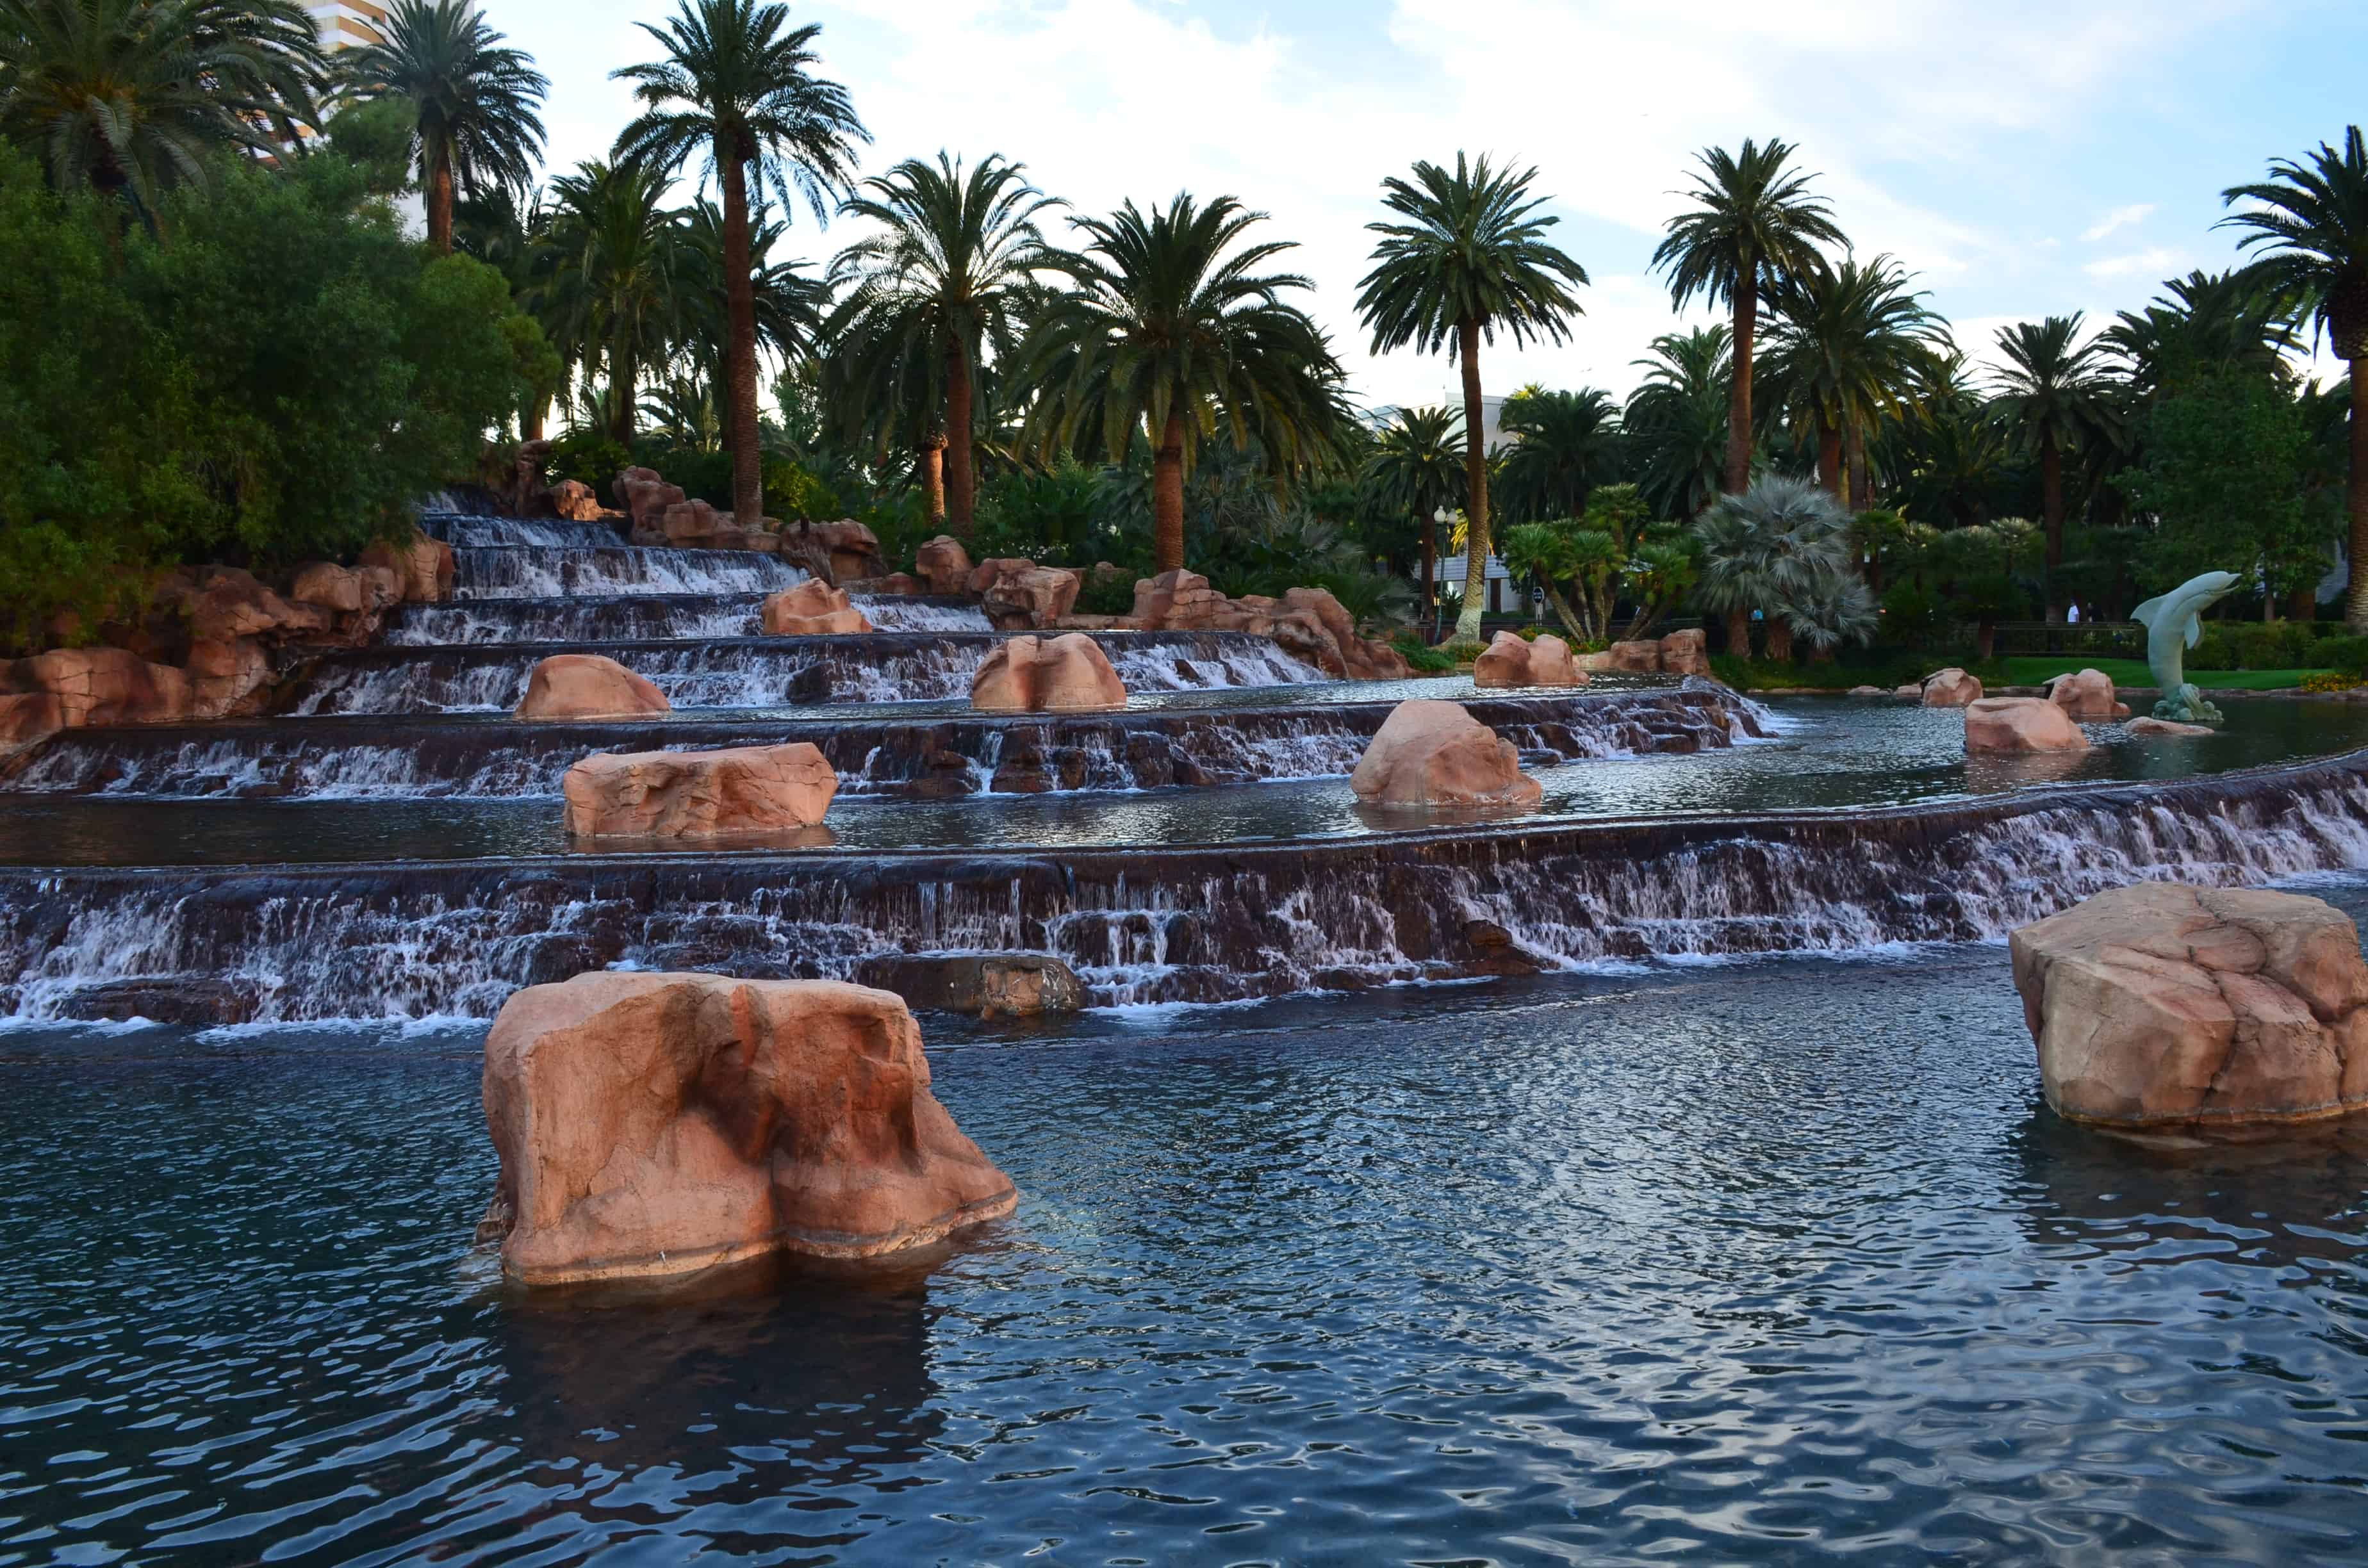 The volcano at the Mirage in Las Vegas, Nevada